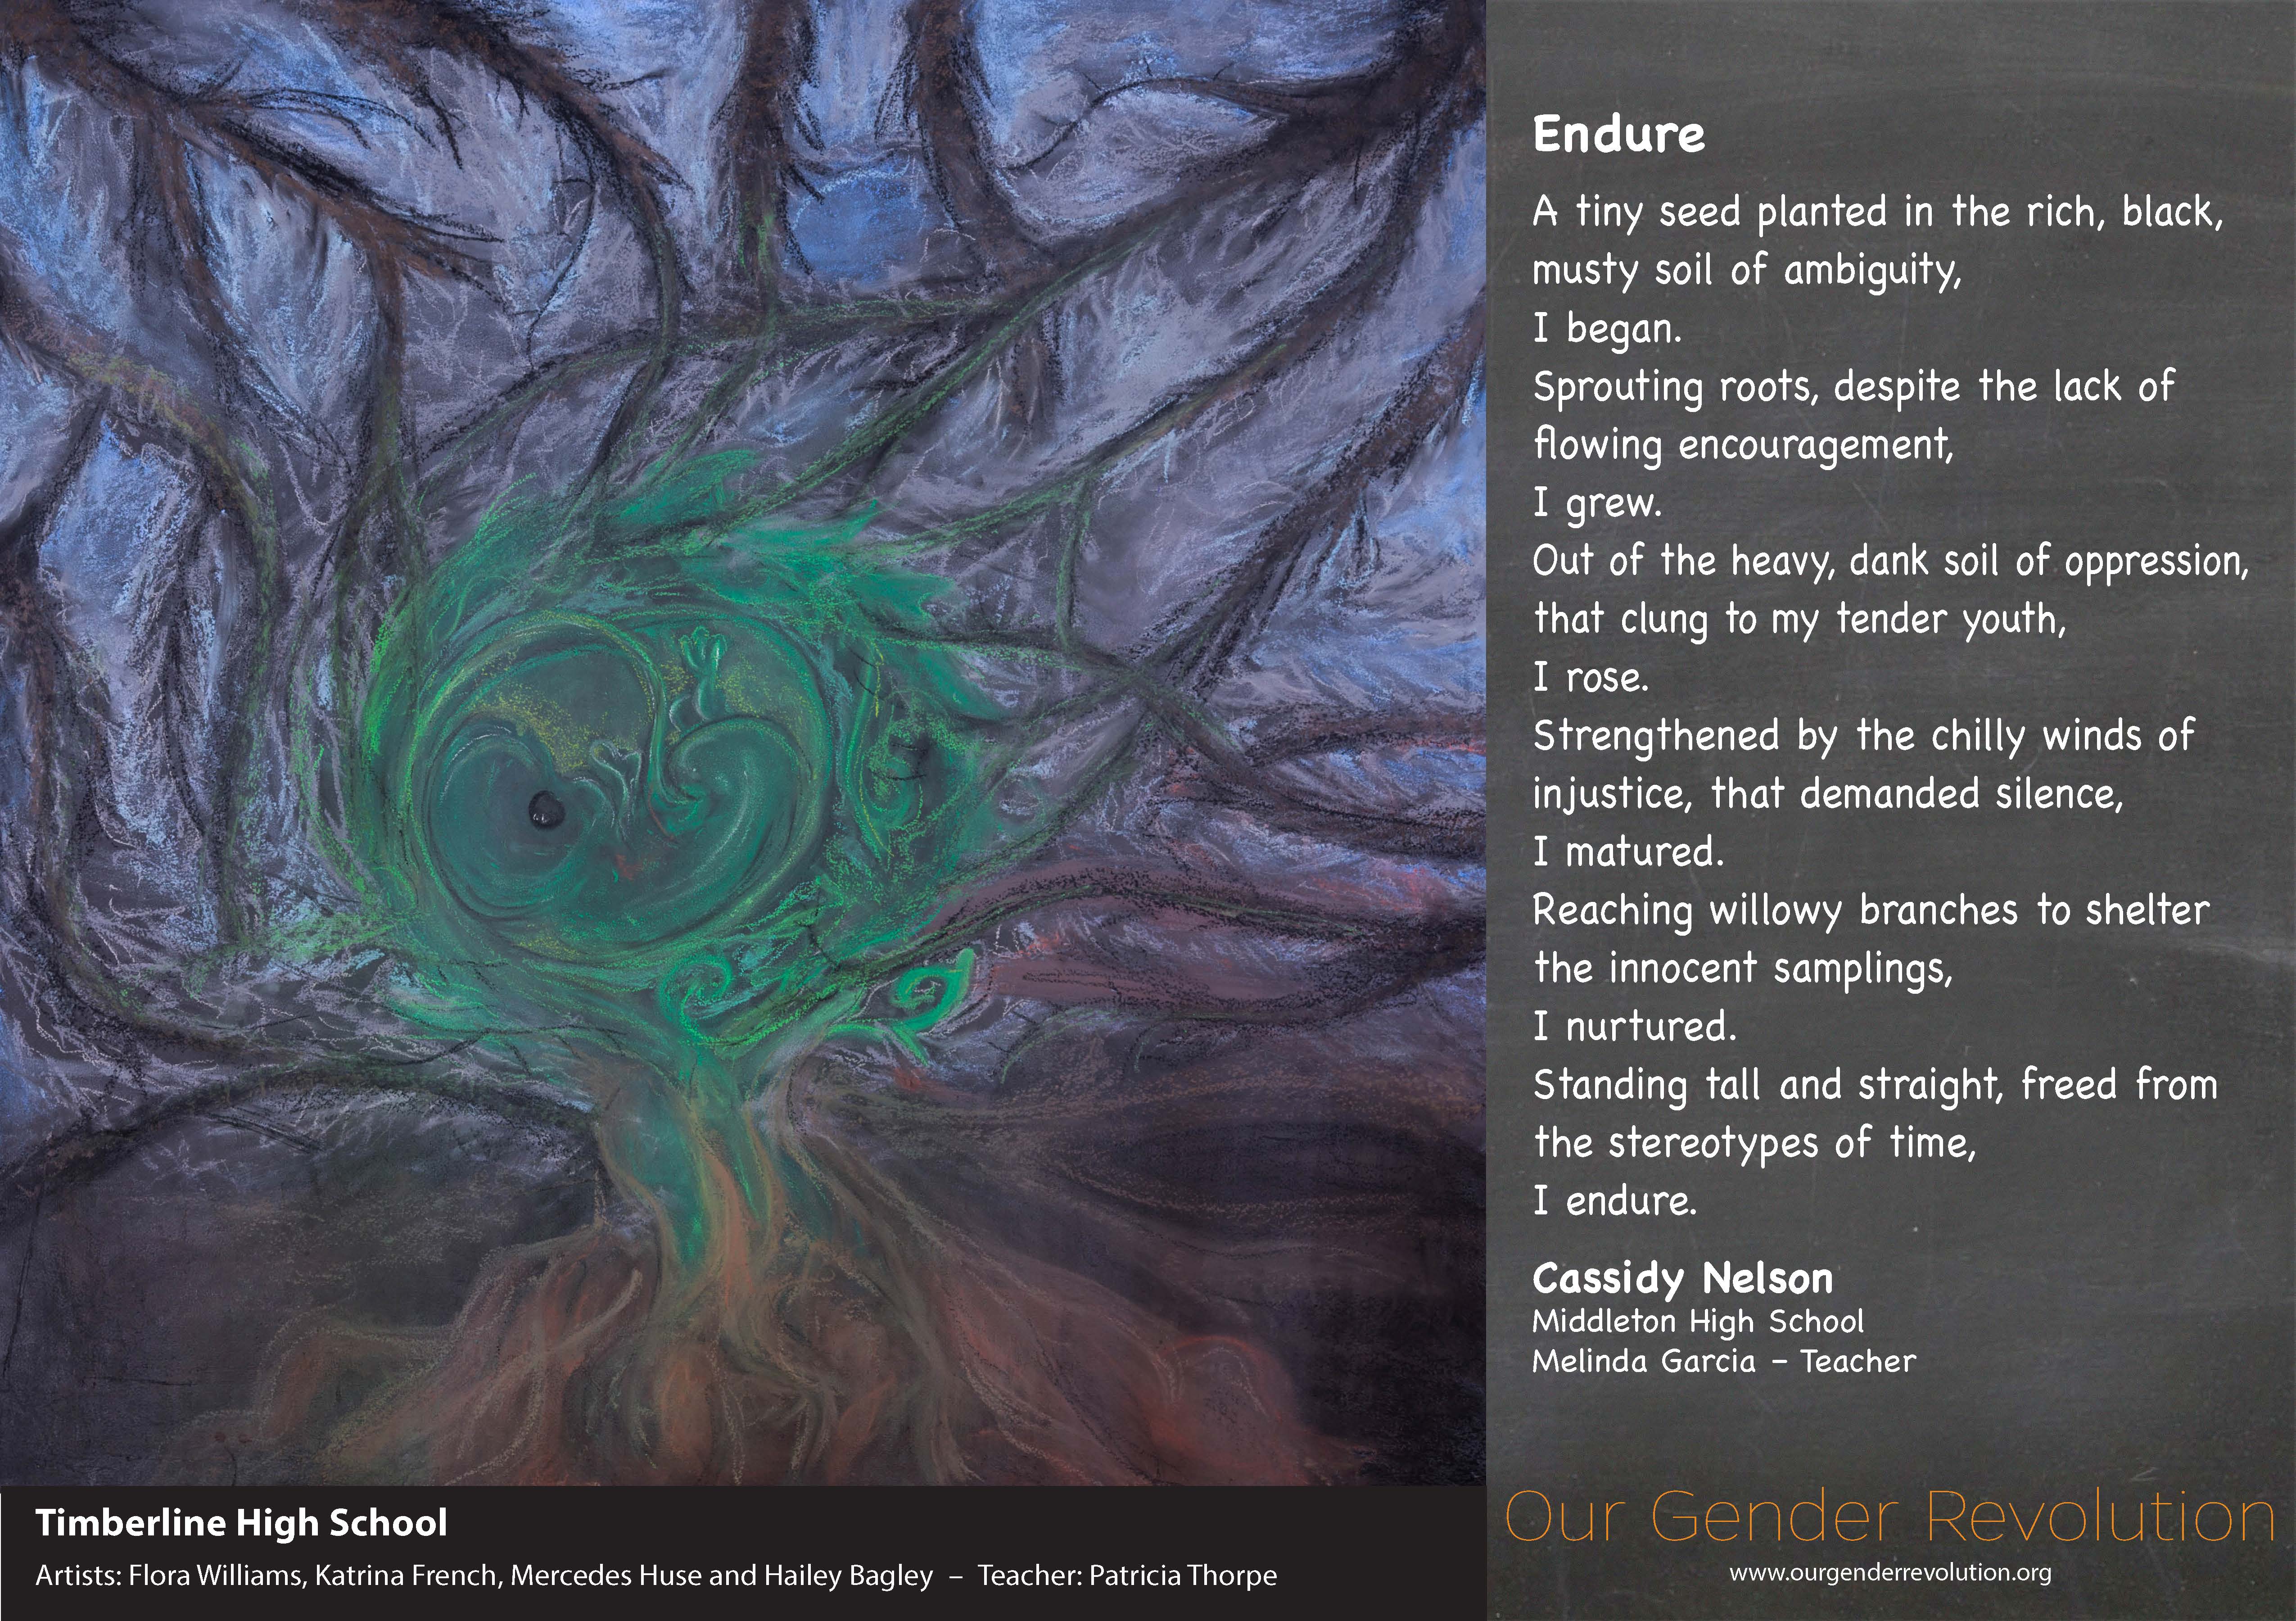 Timberline High School - Endure by Cassidy Nelson